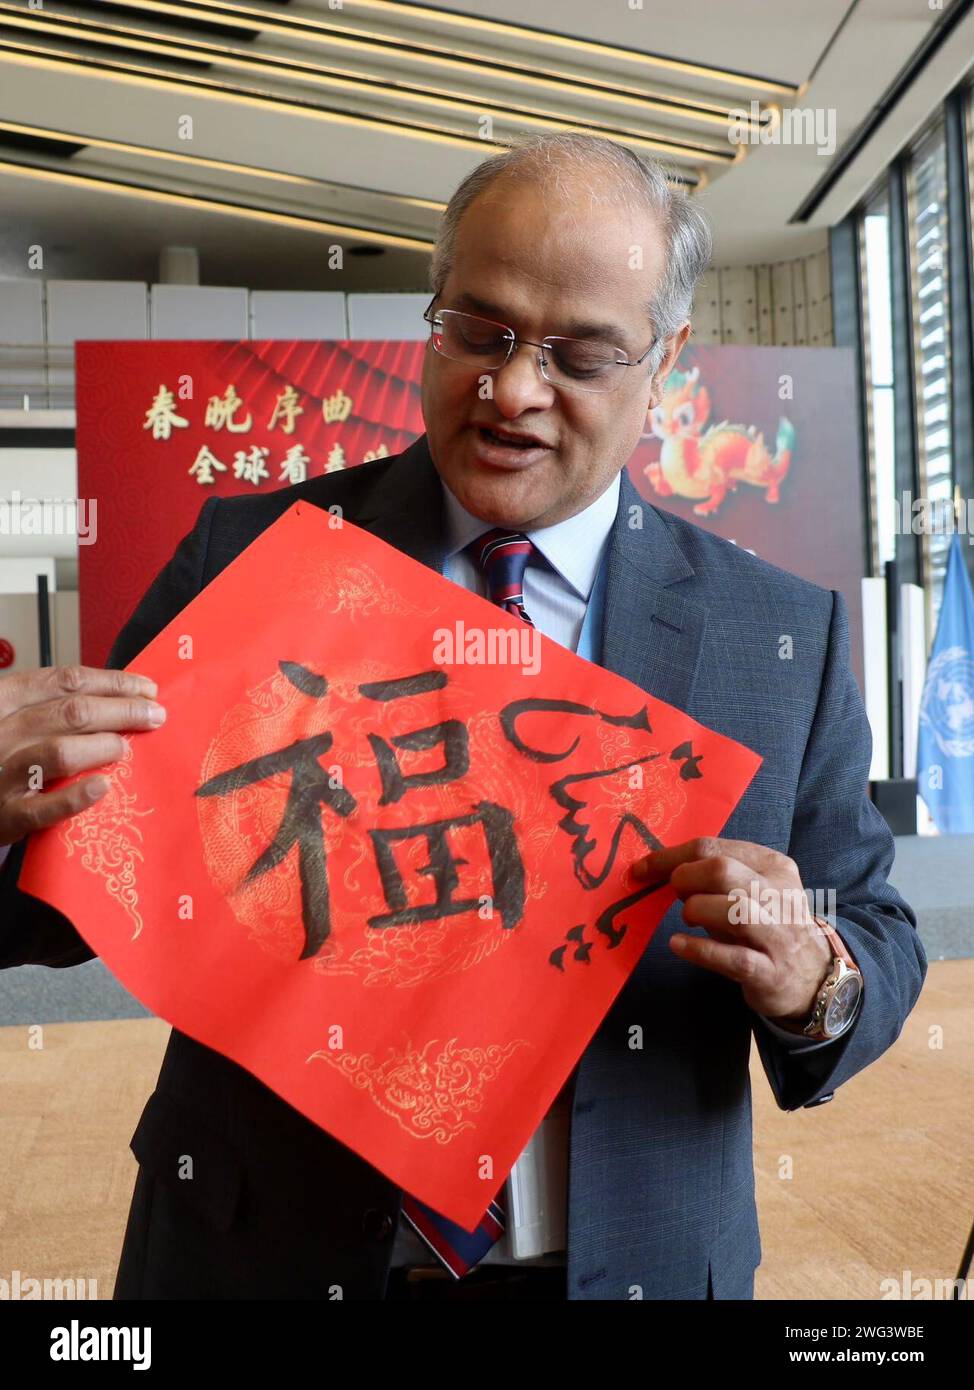 Geneva, Switzerland. 2nd Feb, 2024. Bilal Ahmad, permanent representative of Pakistan to the UN office in Geneva, shows the Chinese character 'Fu', which means 'good fortune', during an event to celebrate the upcoming Spring Festival in Geneva, Switzerland, Feb. 2, 2024. The United Nations (UN) Office in Geneva celebrated the upcoming Spring Festival on Friday, gathering about 300 diplomats and representatives from 51 countries and 15 international organizations. TO GO WITH 'Roundup: UN diplomats celebrate Spring Festival in Geneva' Credit: Wang Qibing/Xinhua/Alamy Live News Stock Photo